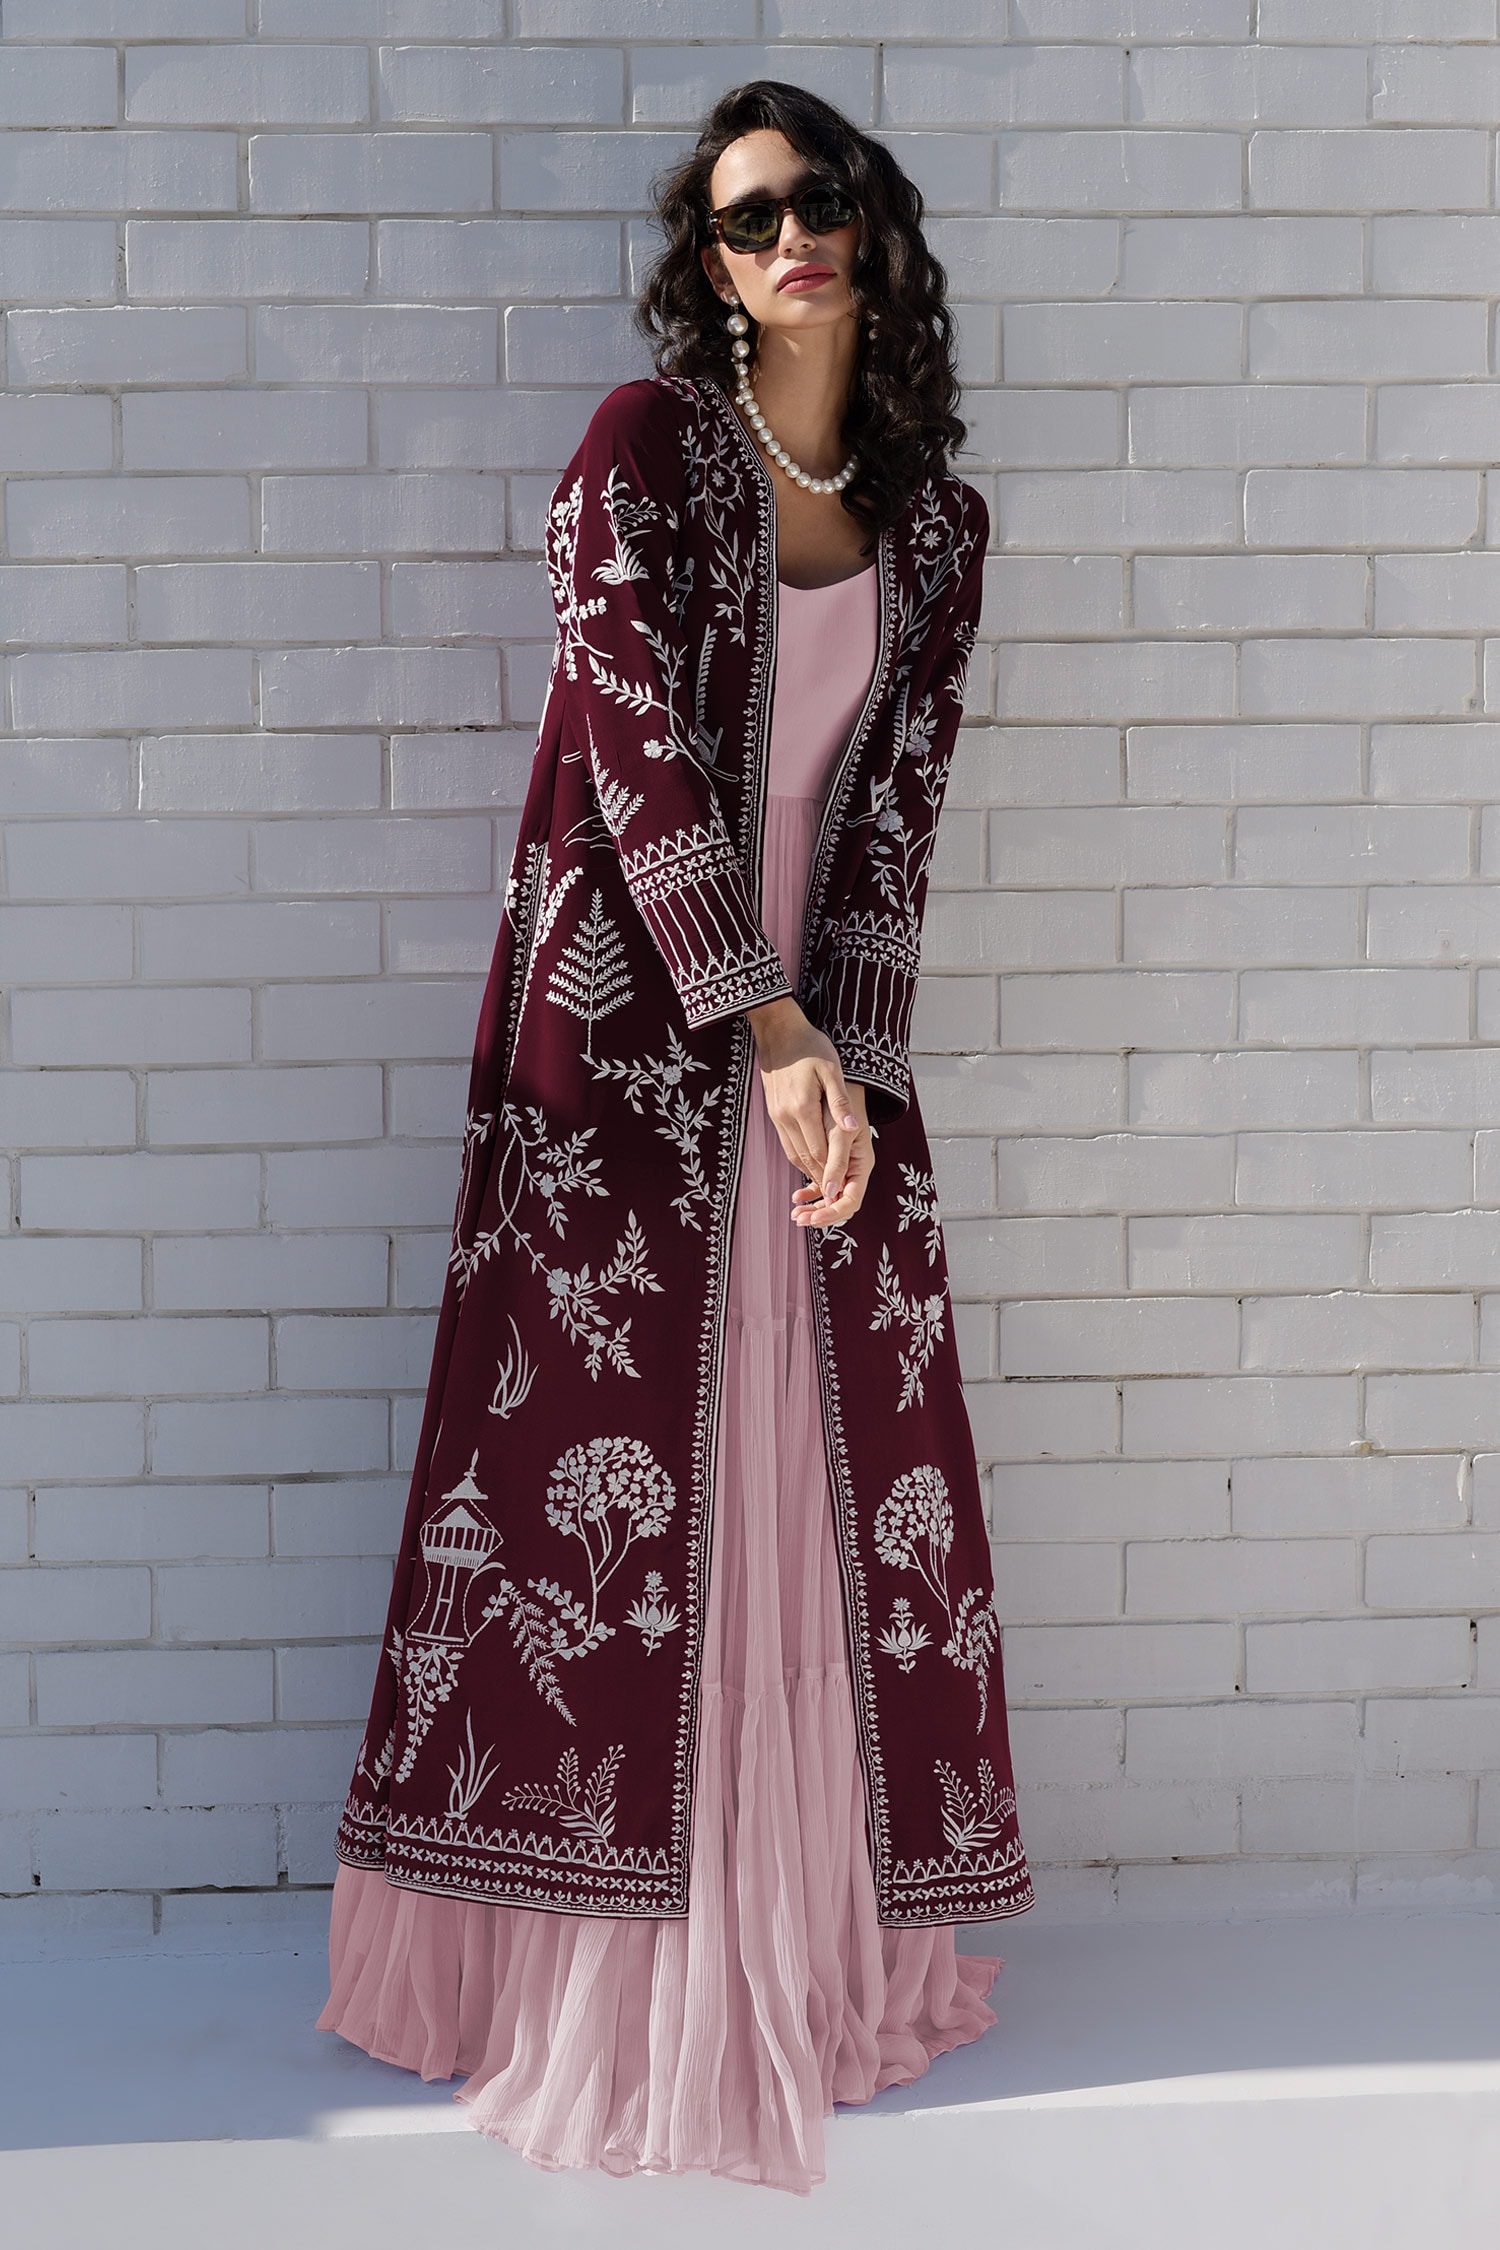 Long dress along with a jacket front open